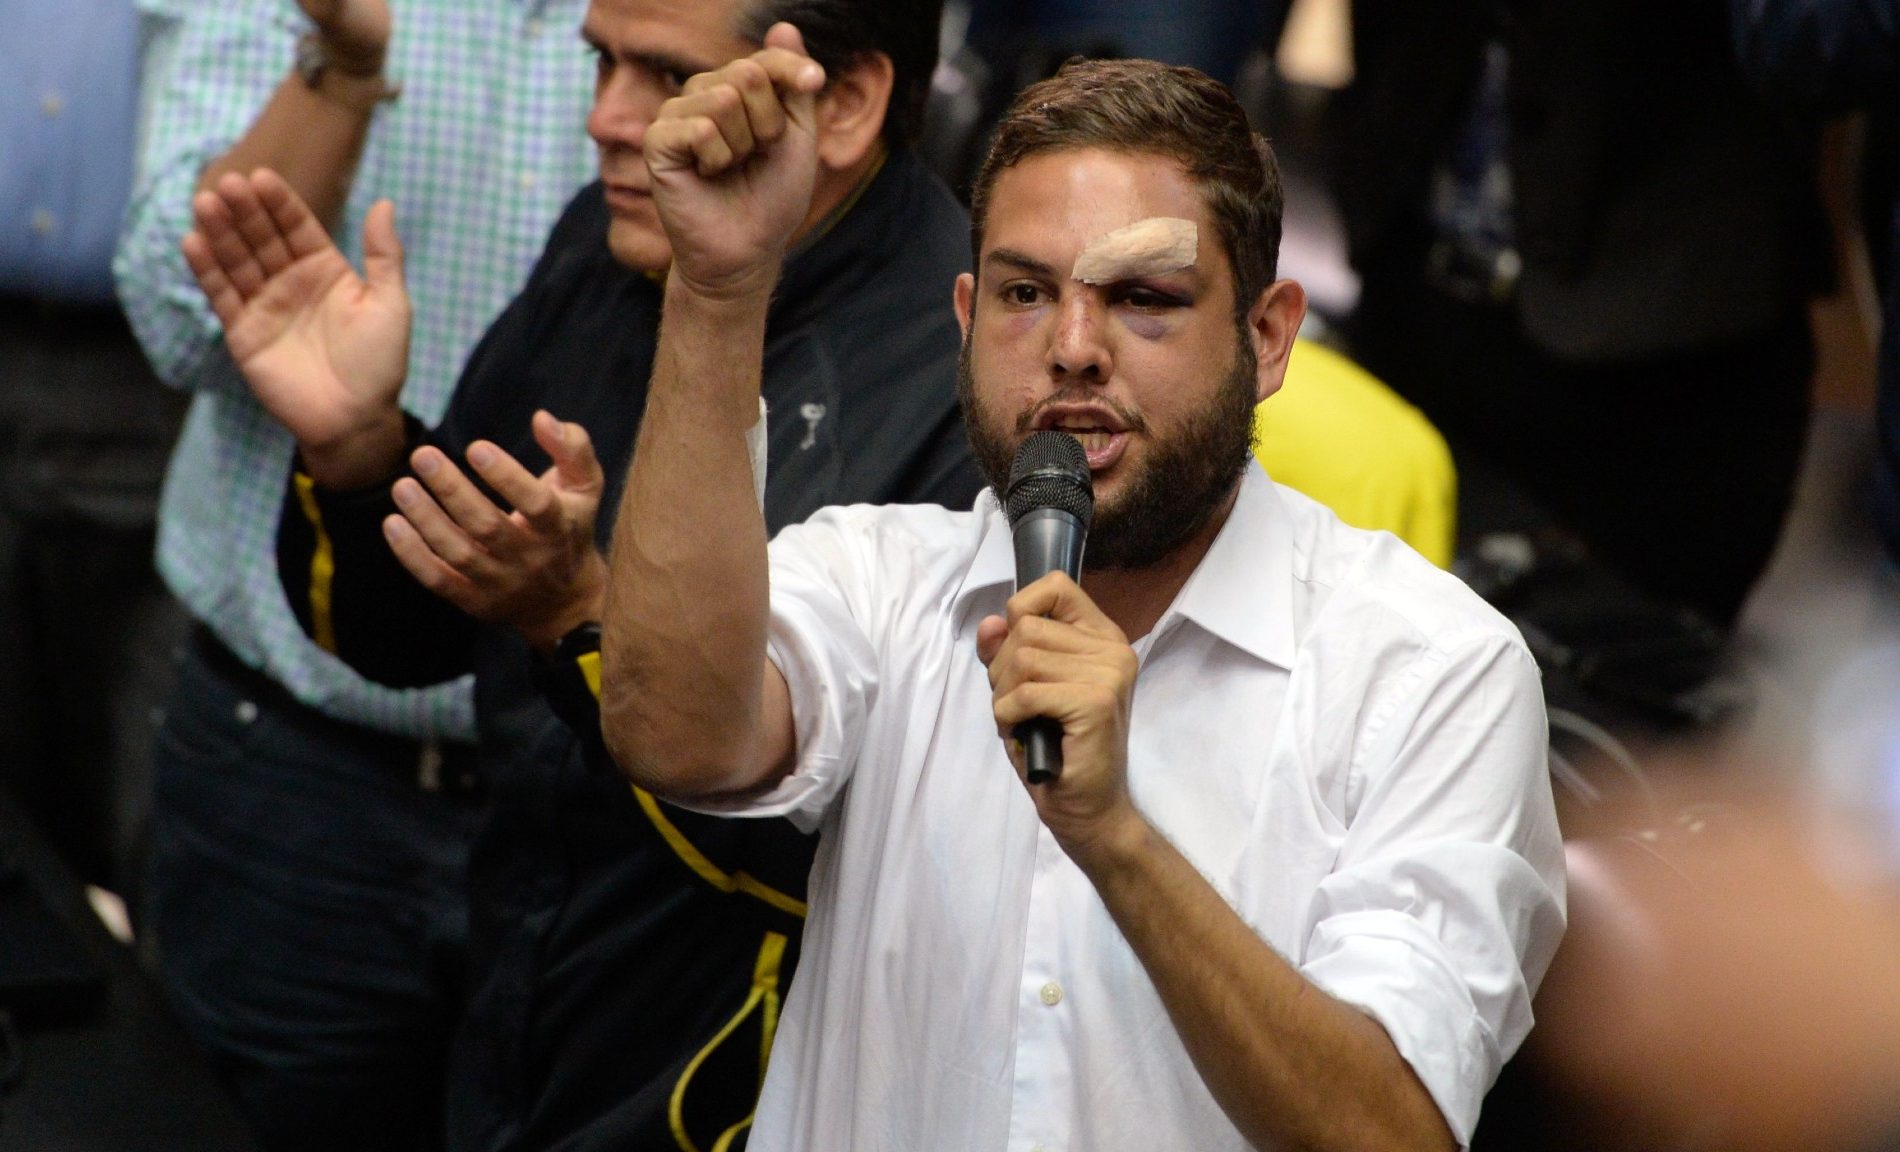 Venezuela’s former opposition vice-president Juan Requesens is guilty of an assassination attempt against Maduro, his lawyer says.